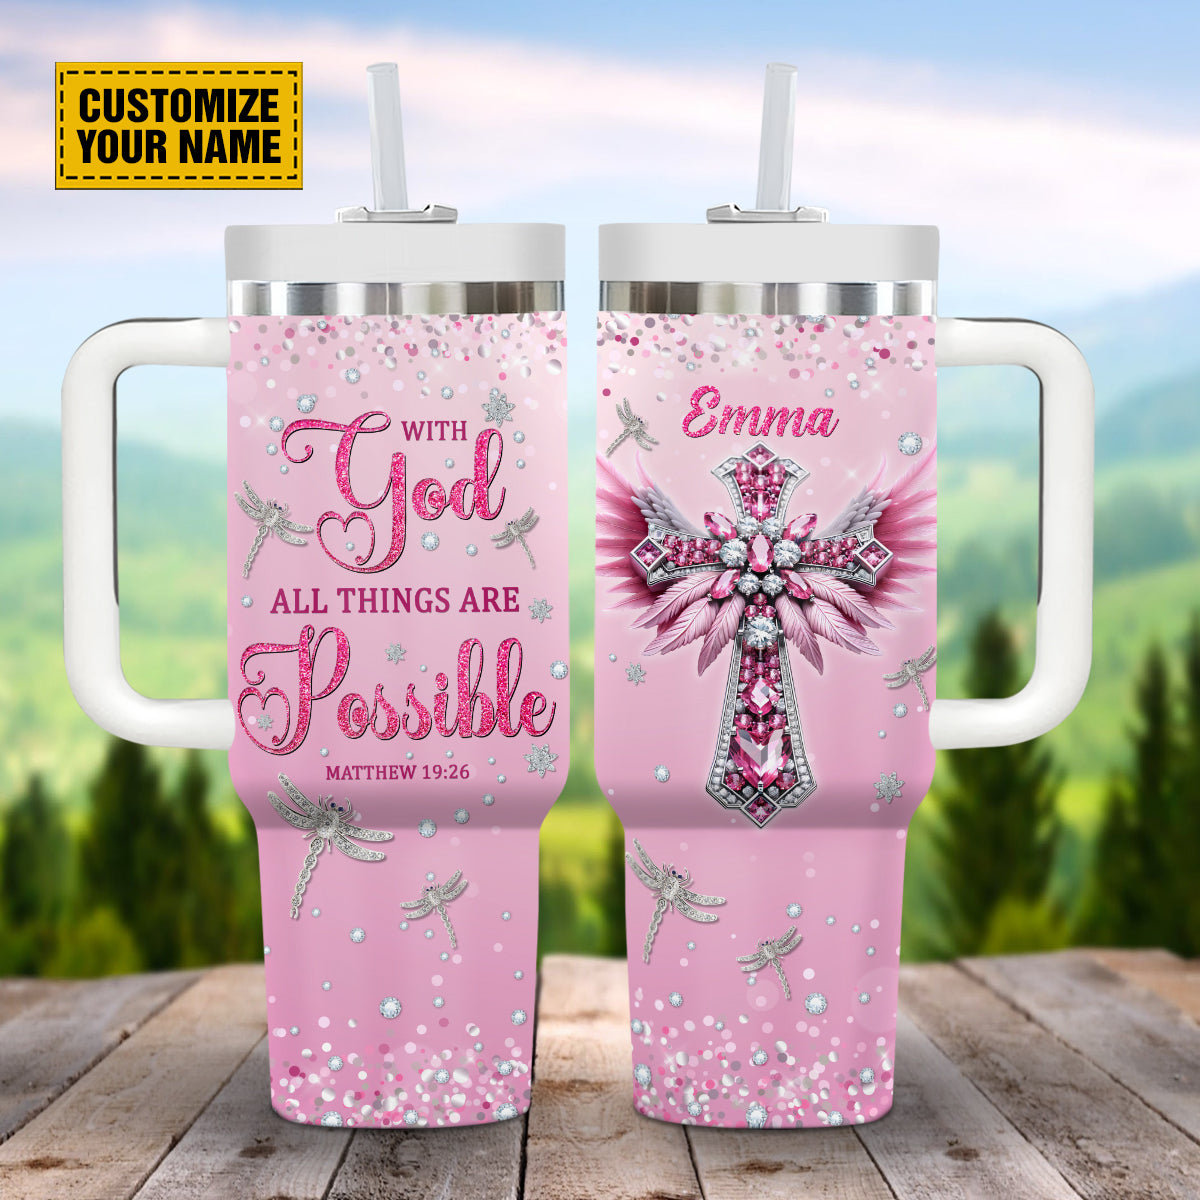 Teesdily | Personalized Jesus Cross Jewelry 40oz Tumbler With Lid And Straw, With God All Things Are Possible Insulated Cup, Spiritual Gifts For Girl